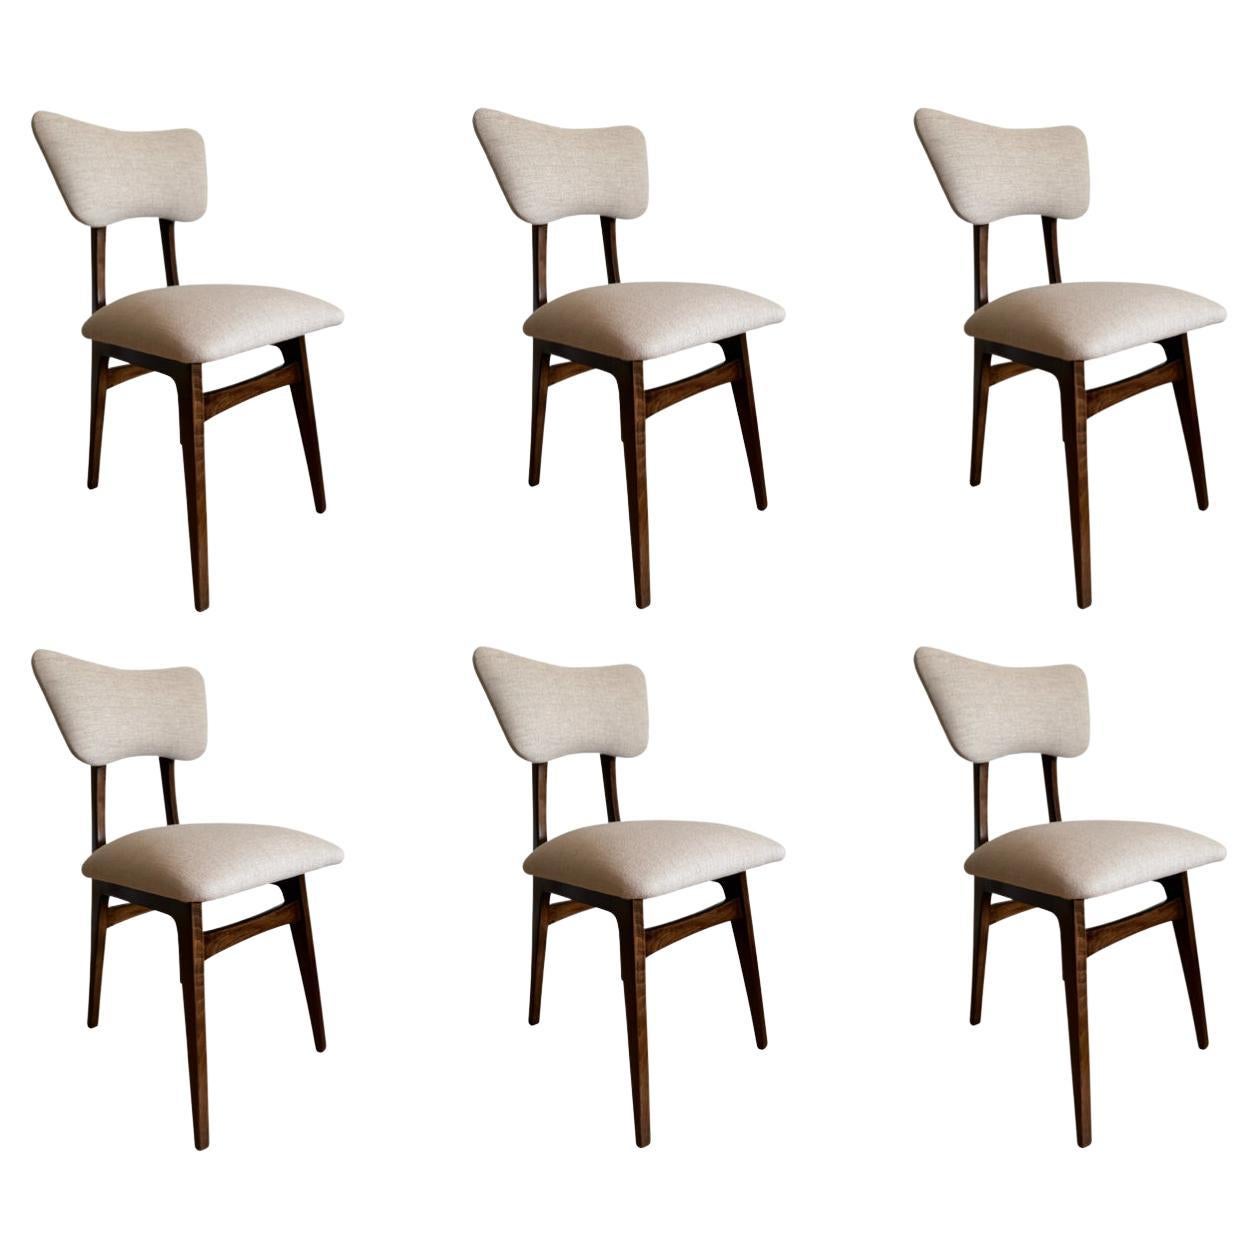 Set of 6 Midcentury Beige Dining Chairs, Europe, 1960s For Sale